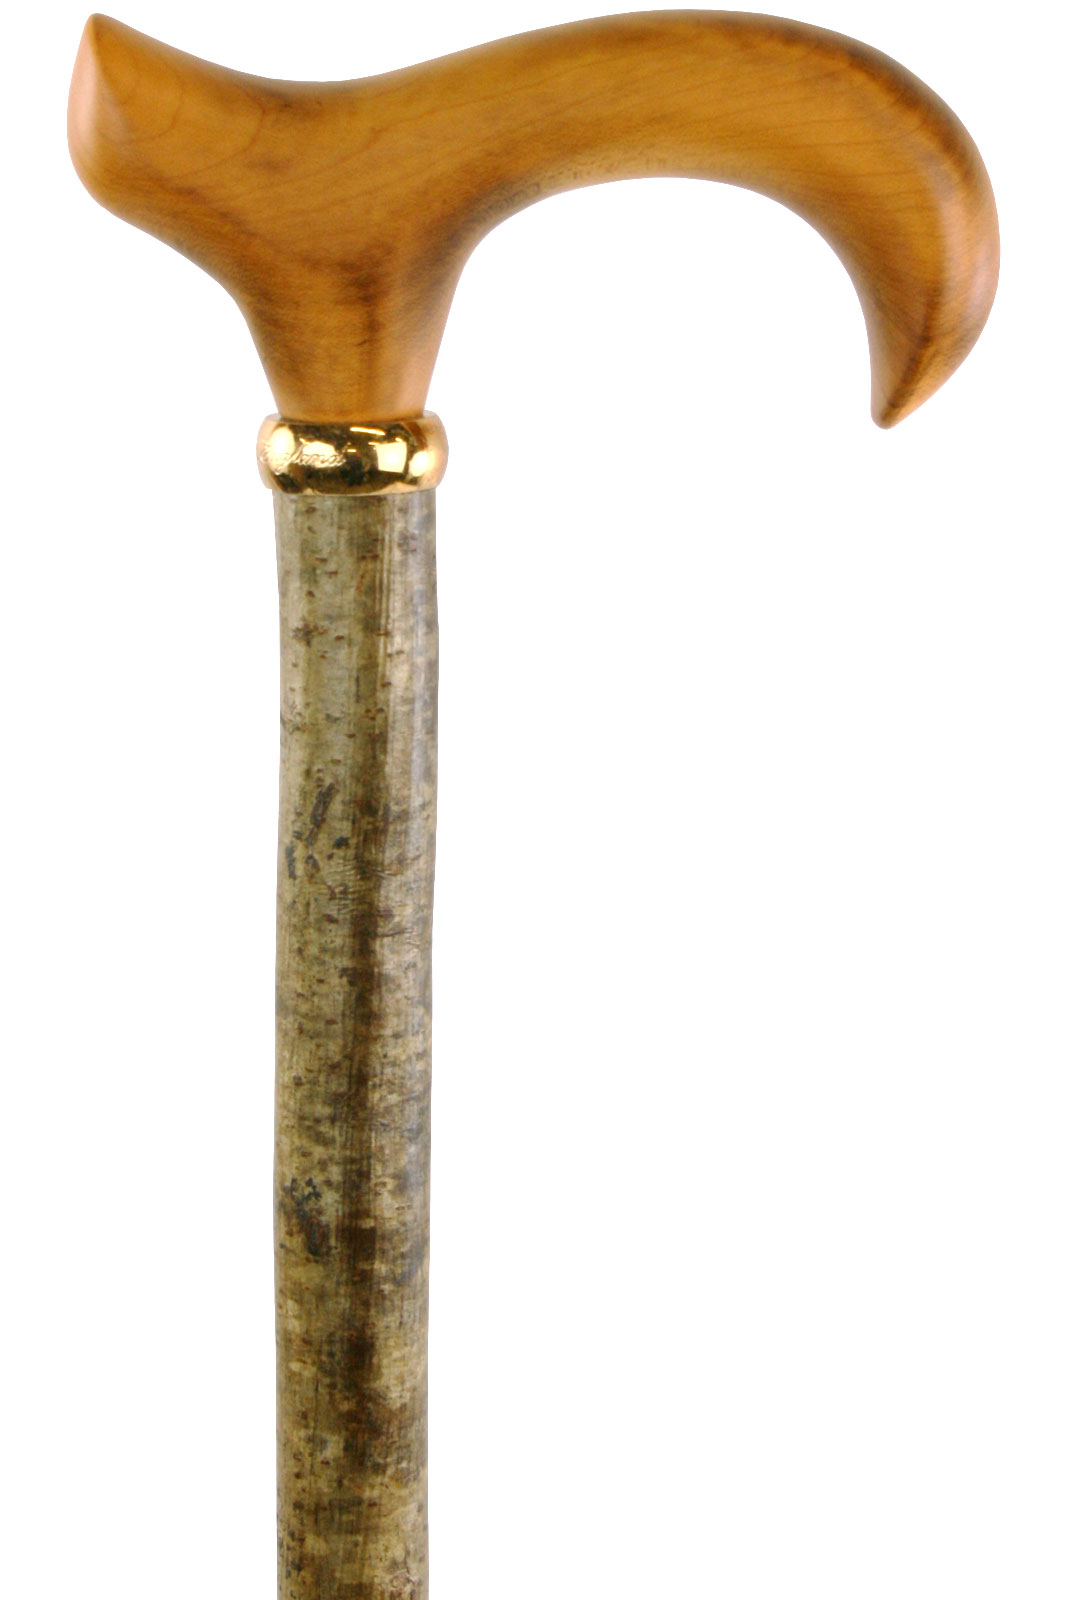 https://www.stickandcaneshop.co.uk/user/products/large/pic_ClassicCanes_1215_Maple_Country_wide_Derby_Cane_1.jpg